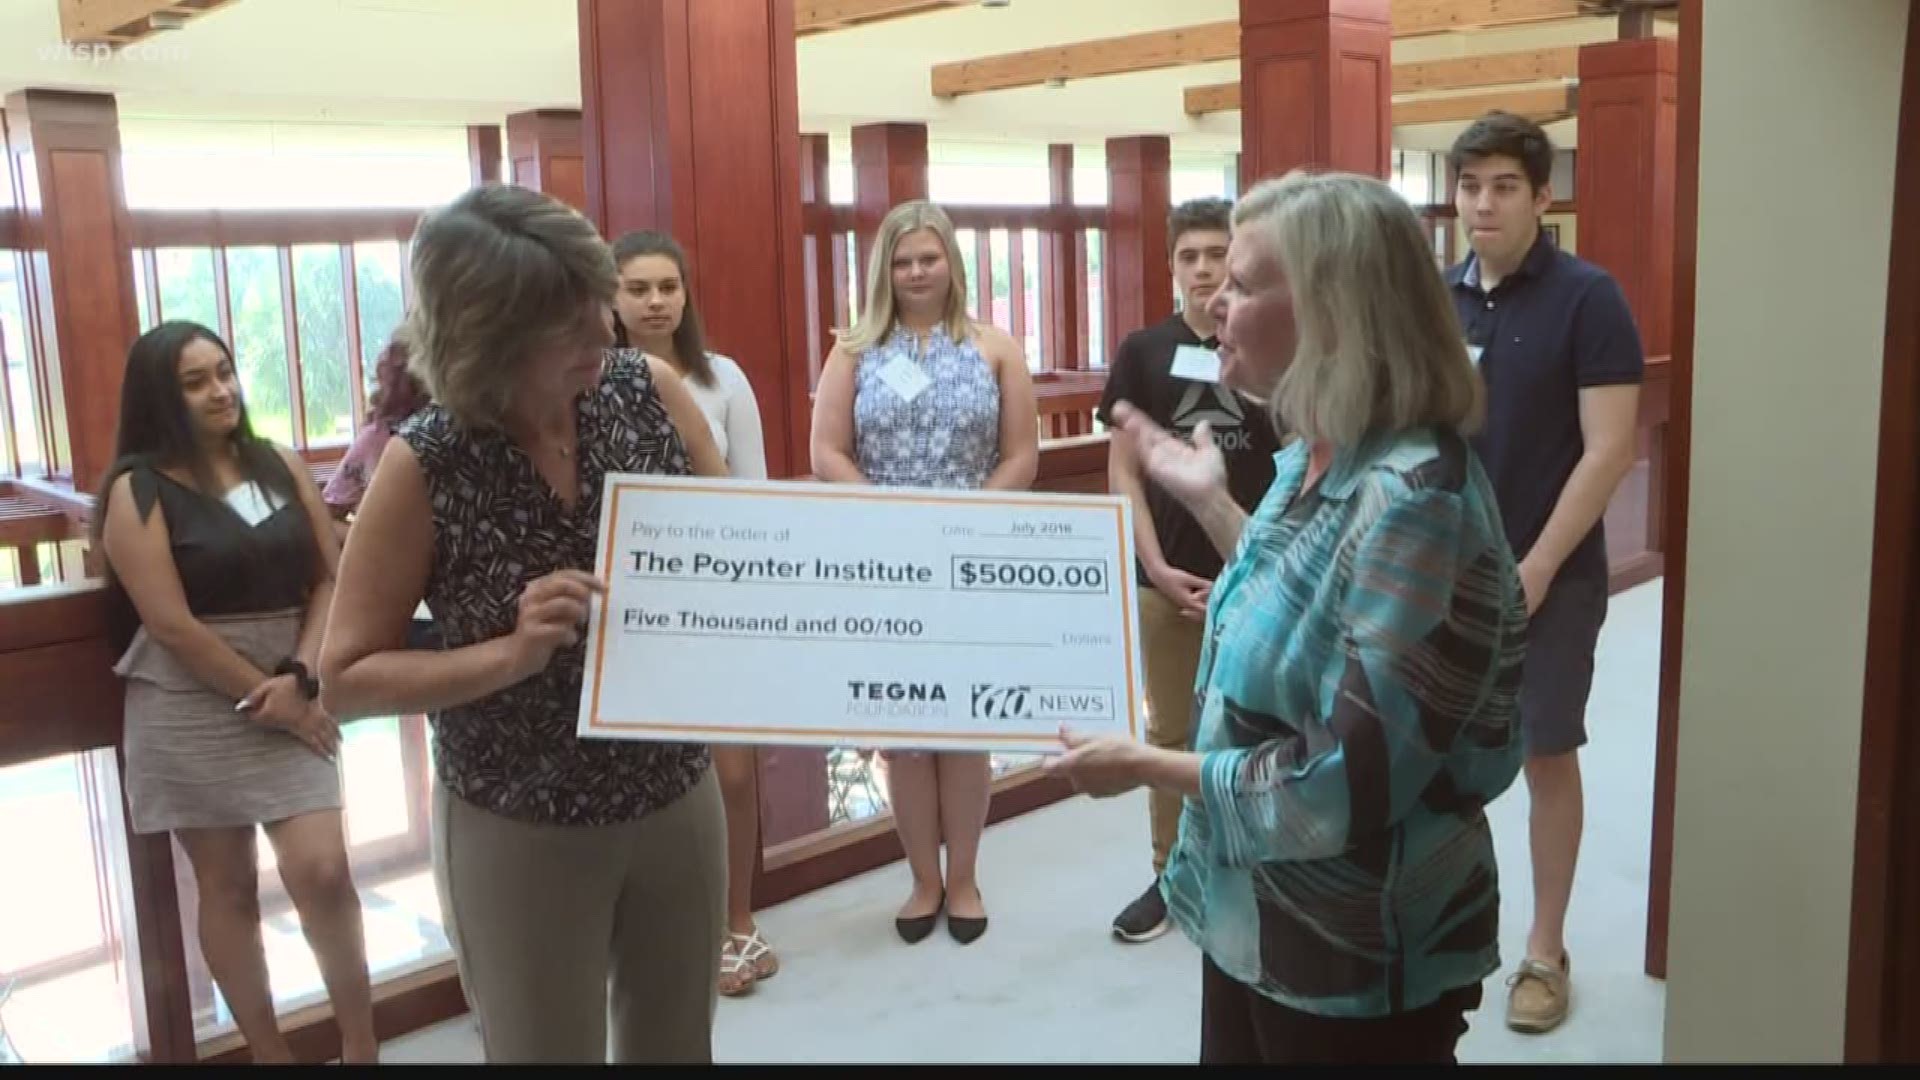 10News and the TEGNA Foundation presented the Poynter Institute with a $5,000 grant to support this and other summer programs for high school students. 